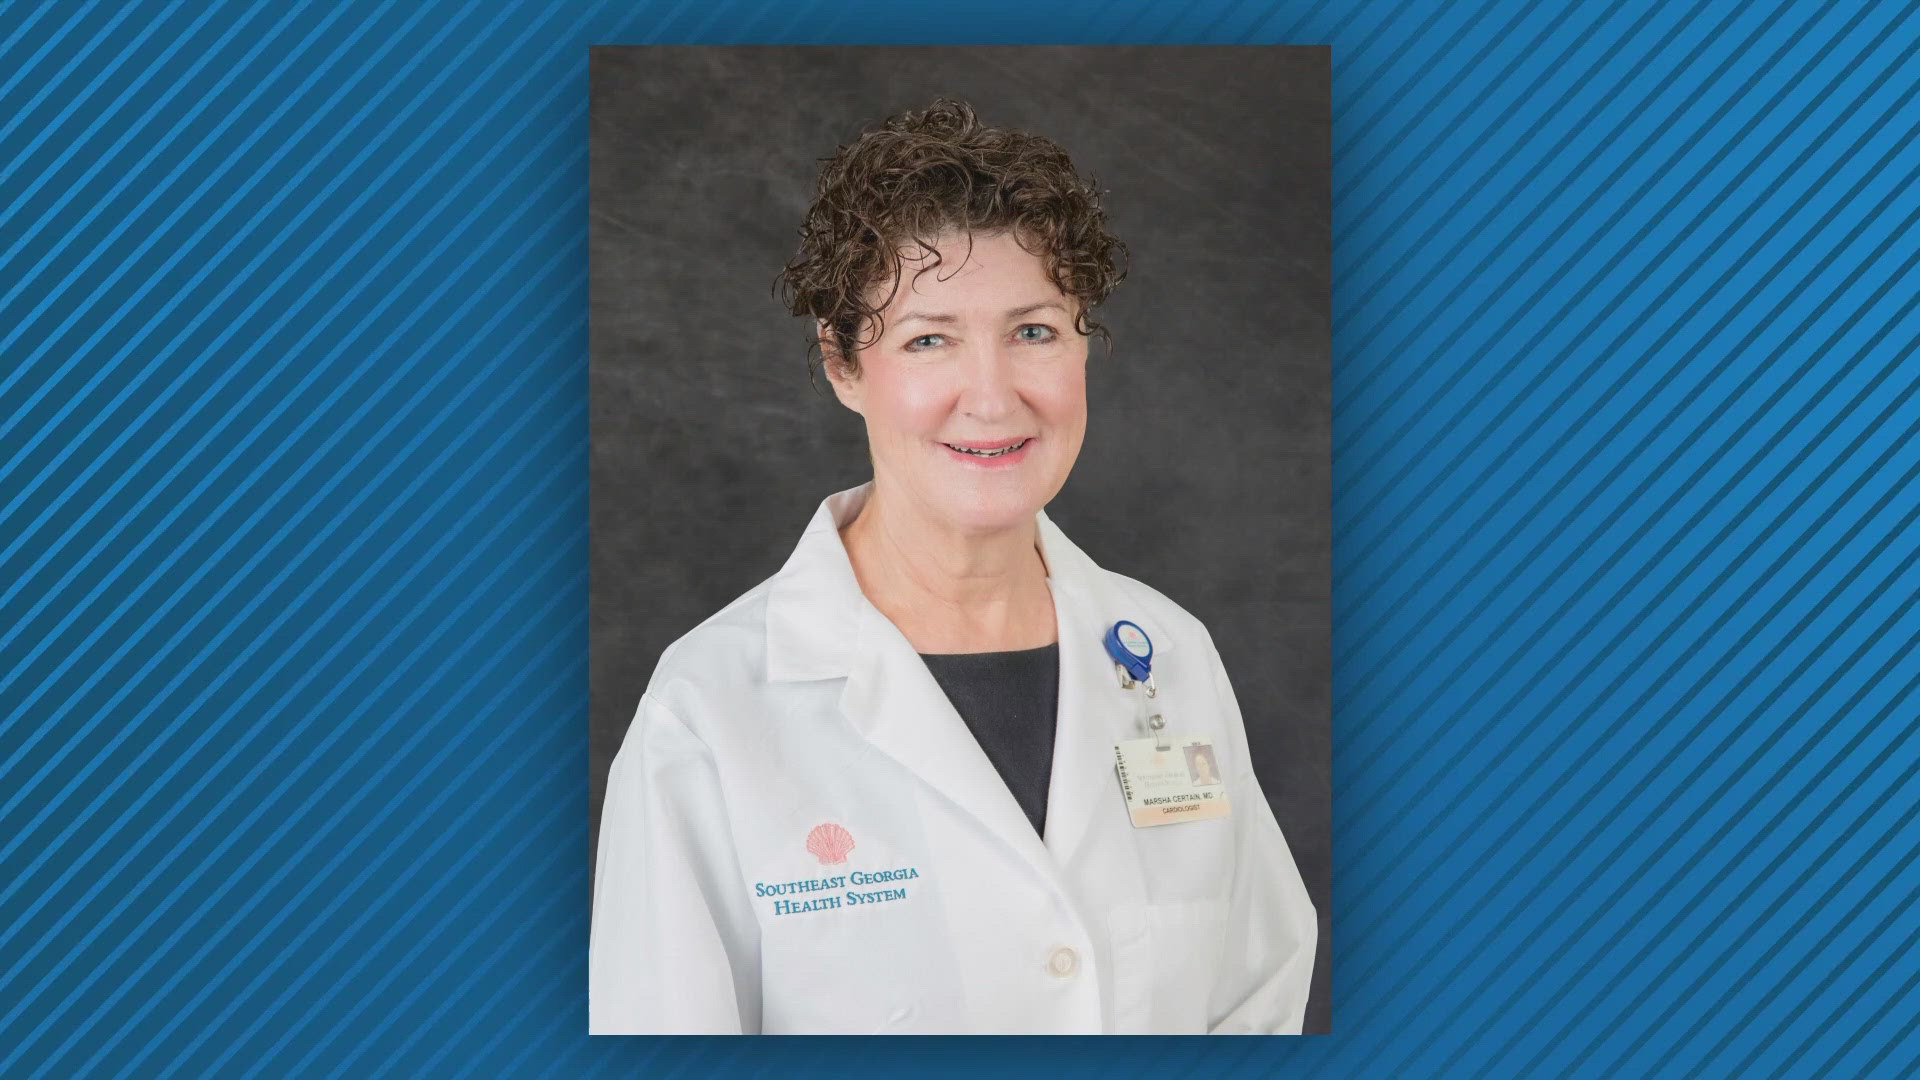 Dr. Marsha Certain was a cardiologist at Southeast Georgia Physician Associates since 1987. The boyfriend told a family member that he had killed her, police said.